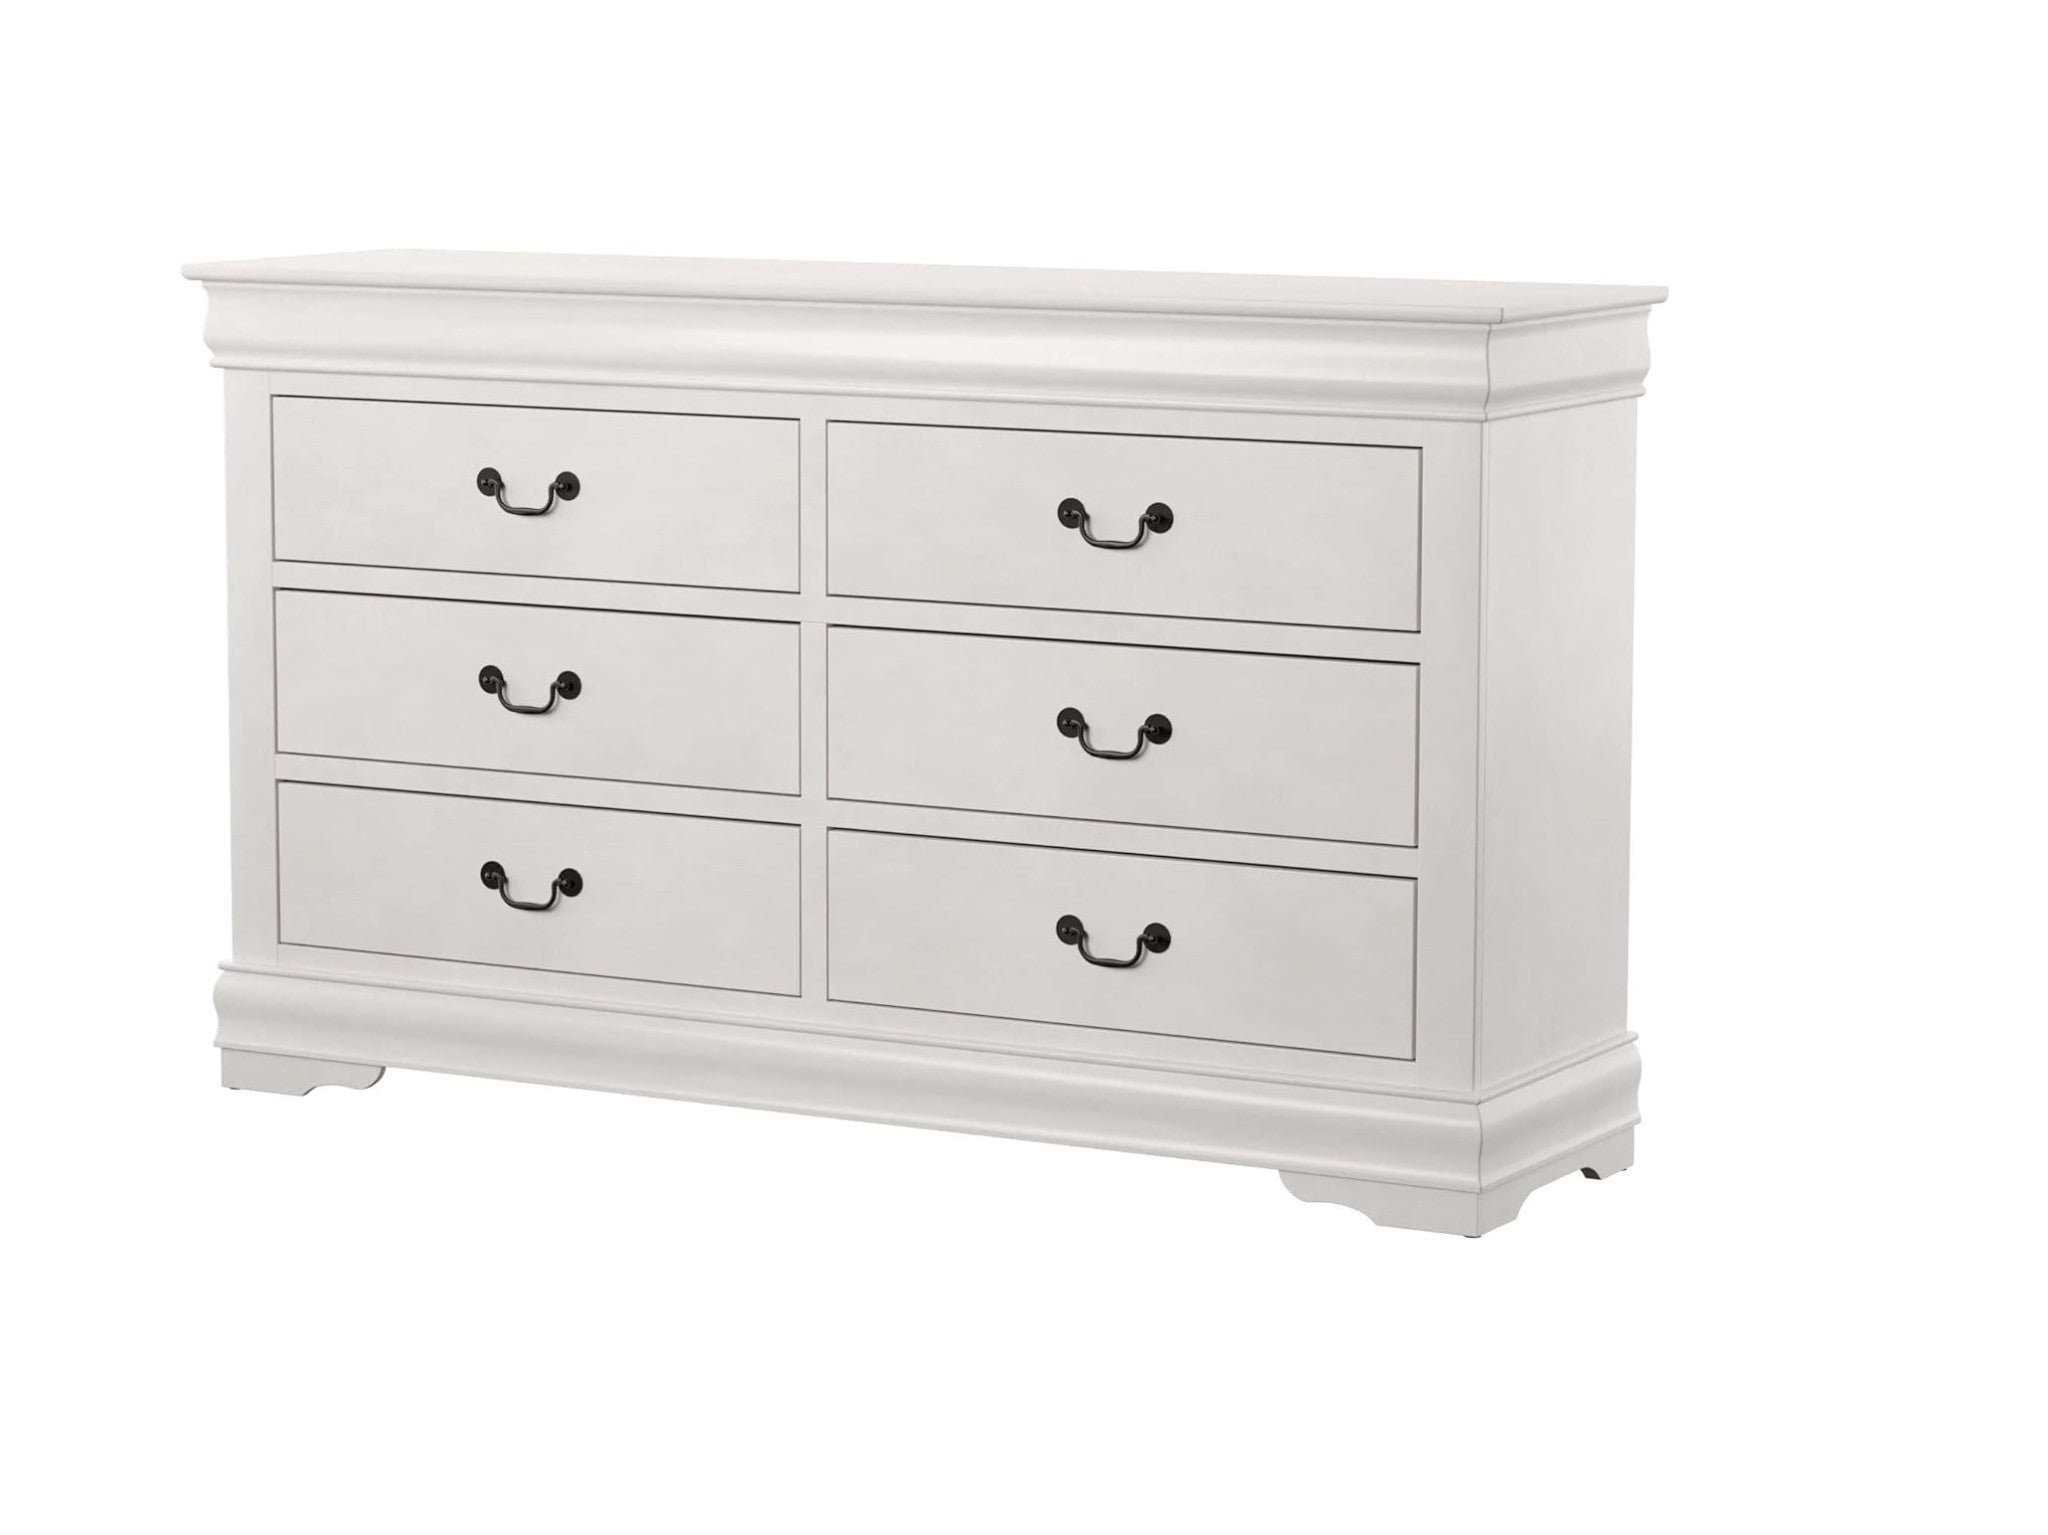 57" White Solid Wood Six Drawer Double Dresser